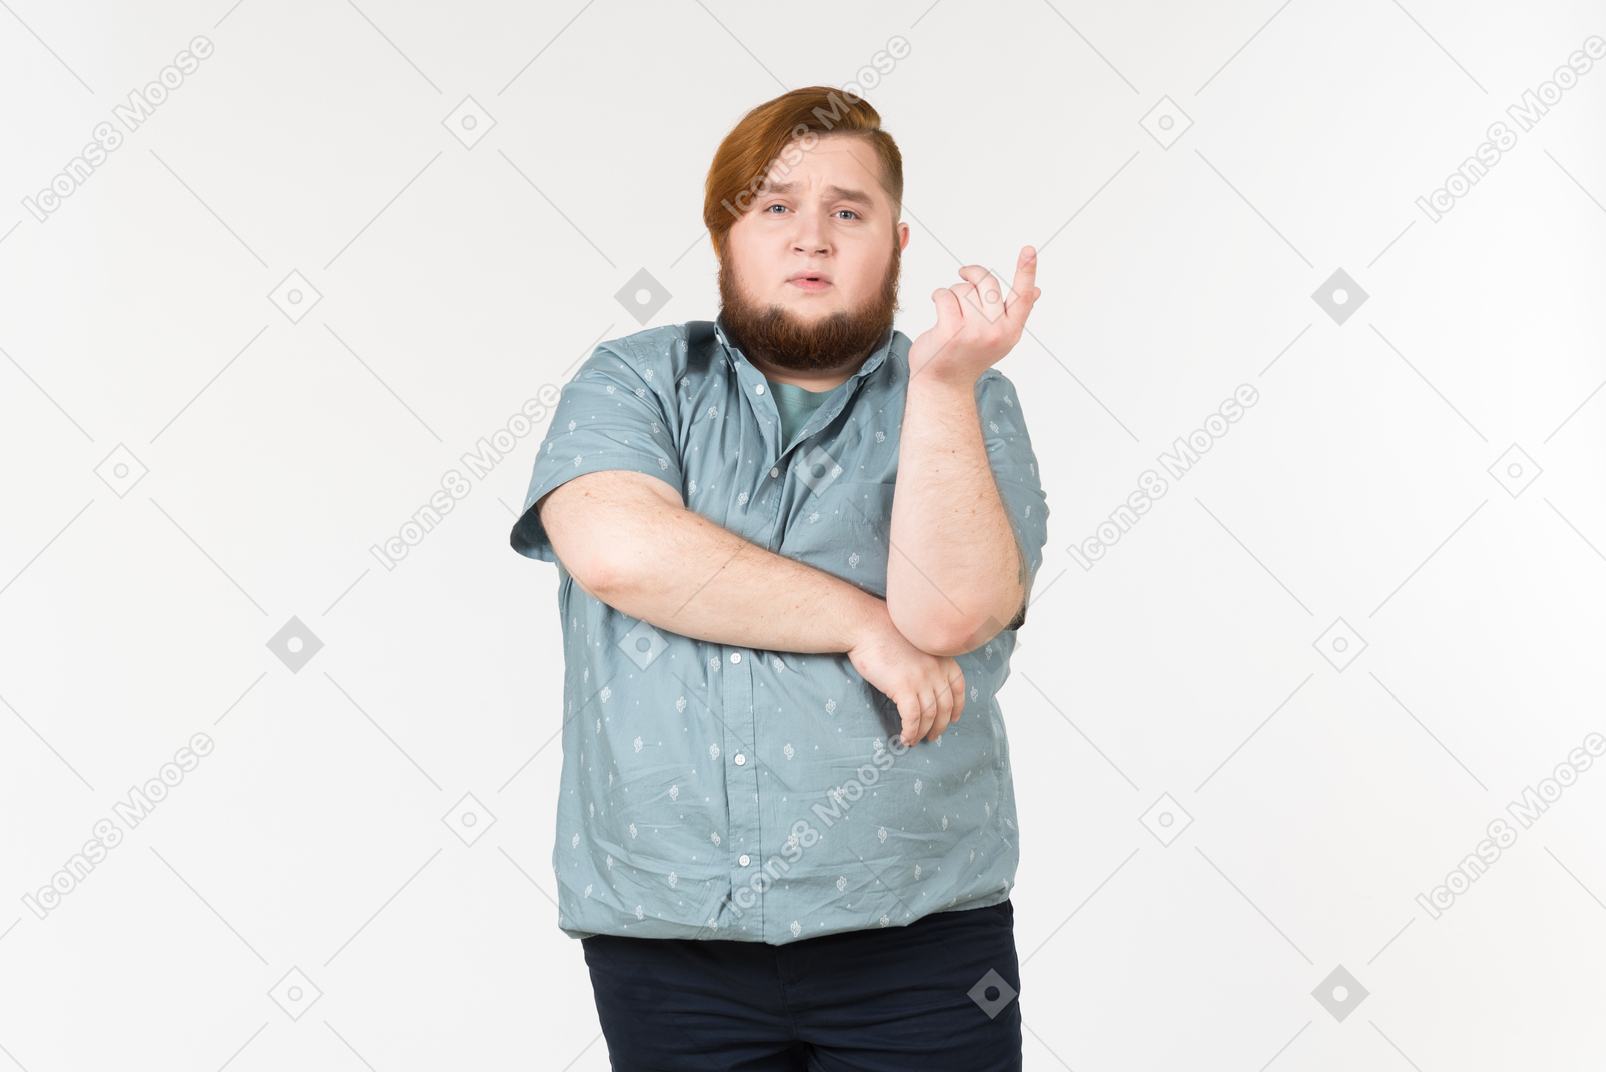 Pensive young overweight man standing with hands crossed